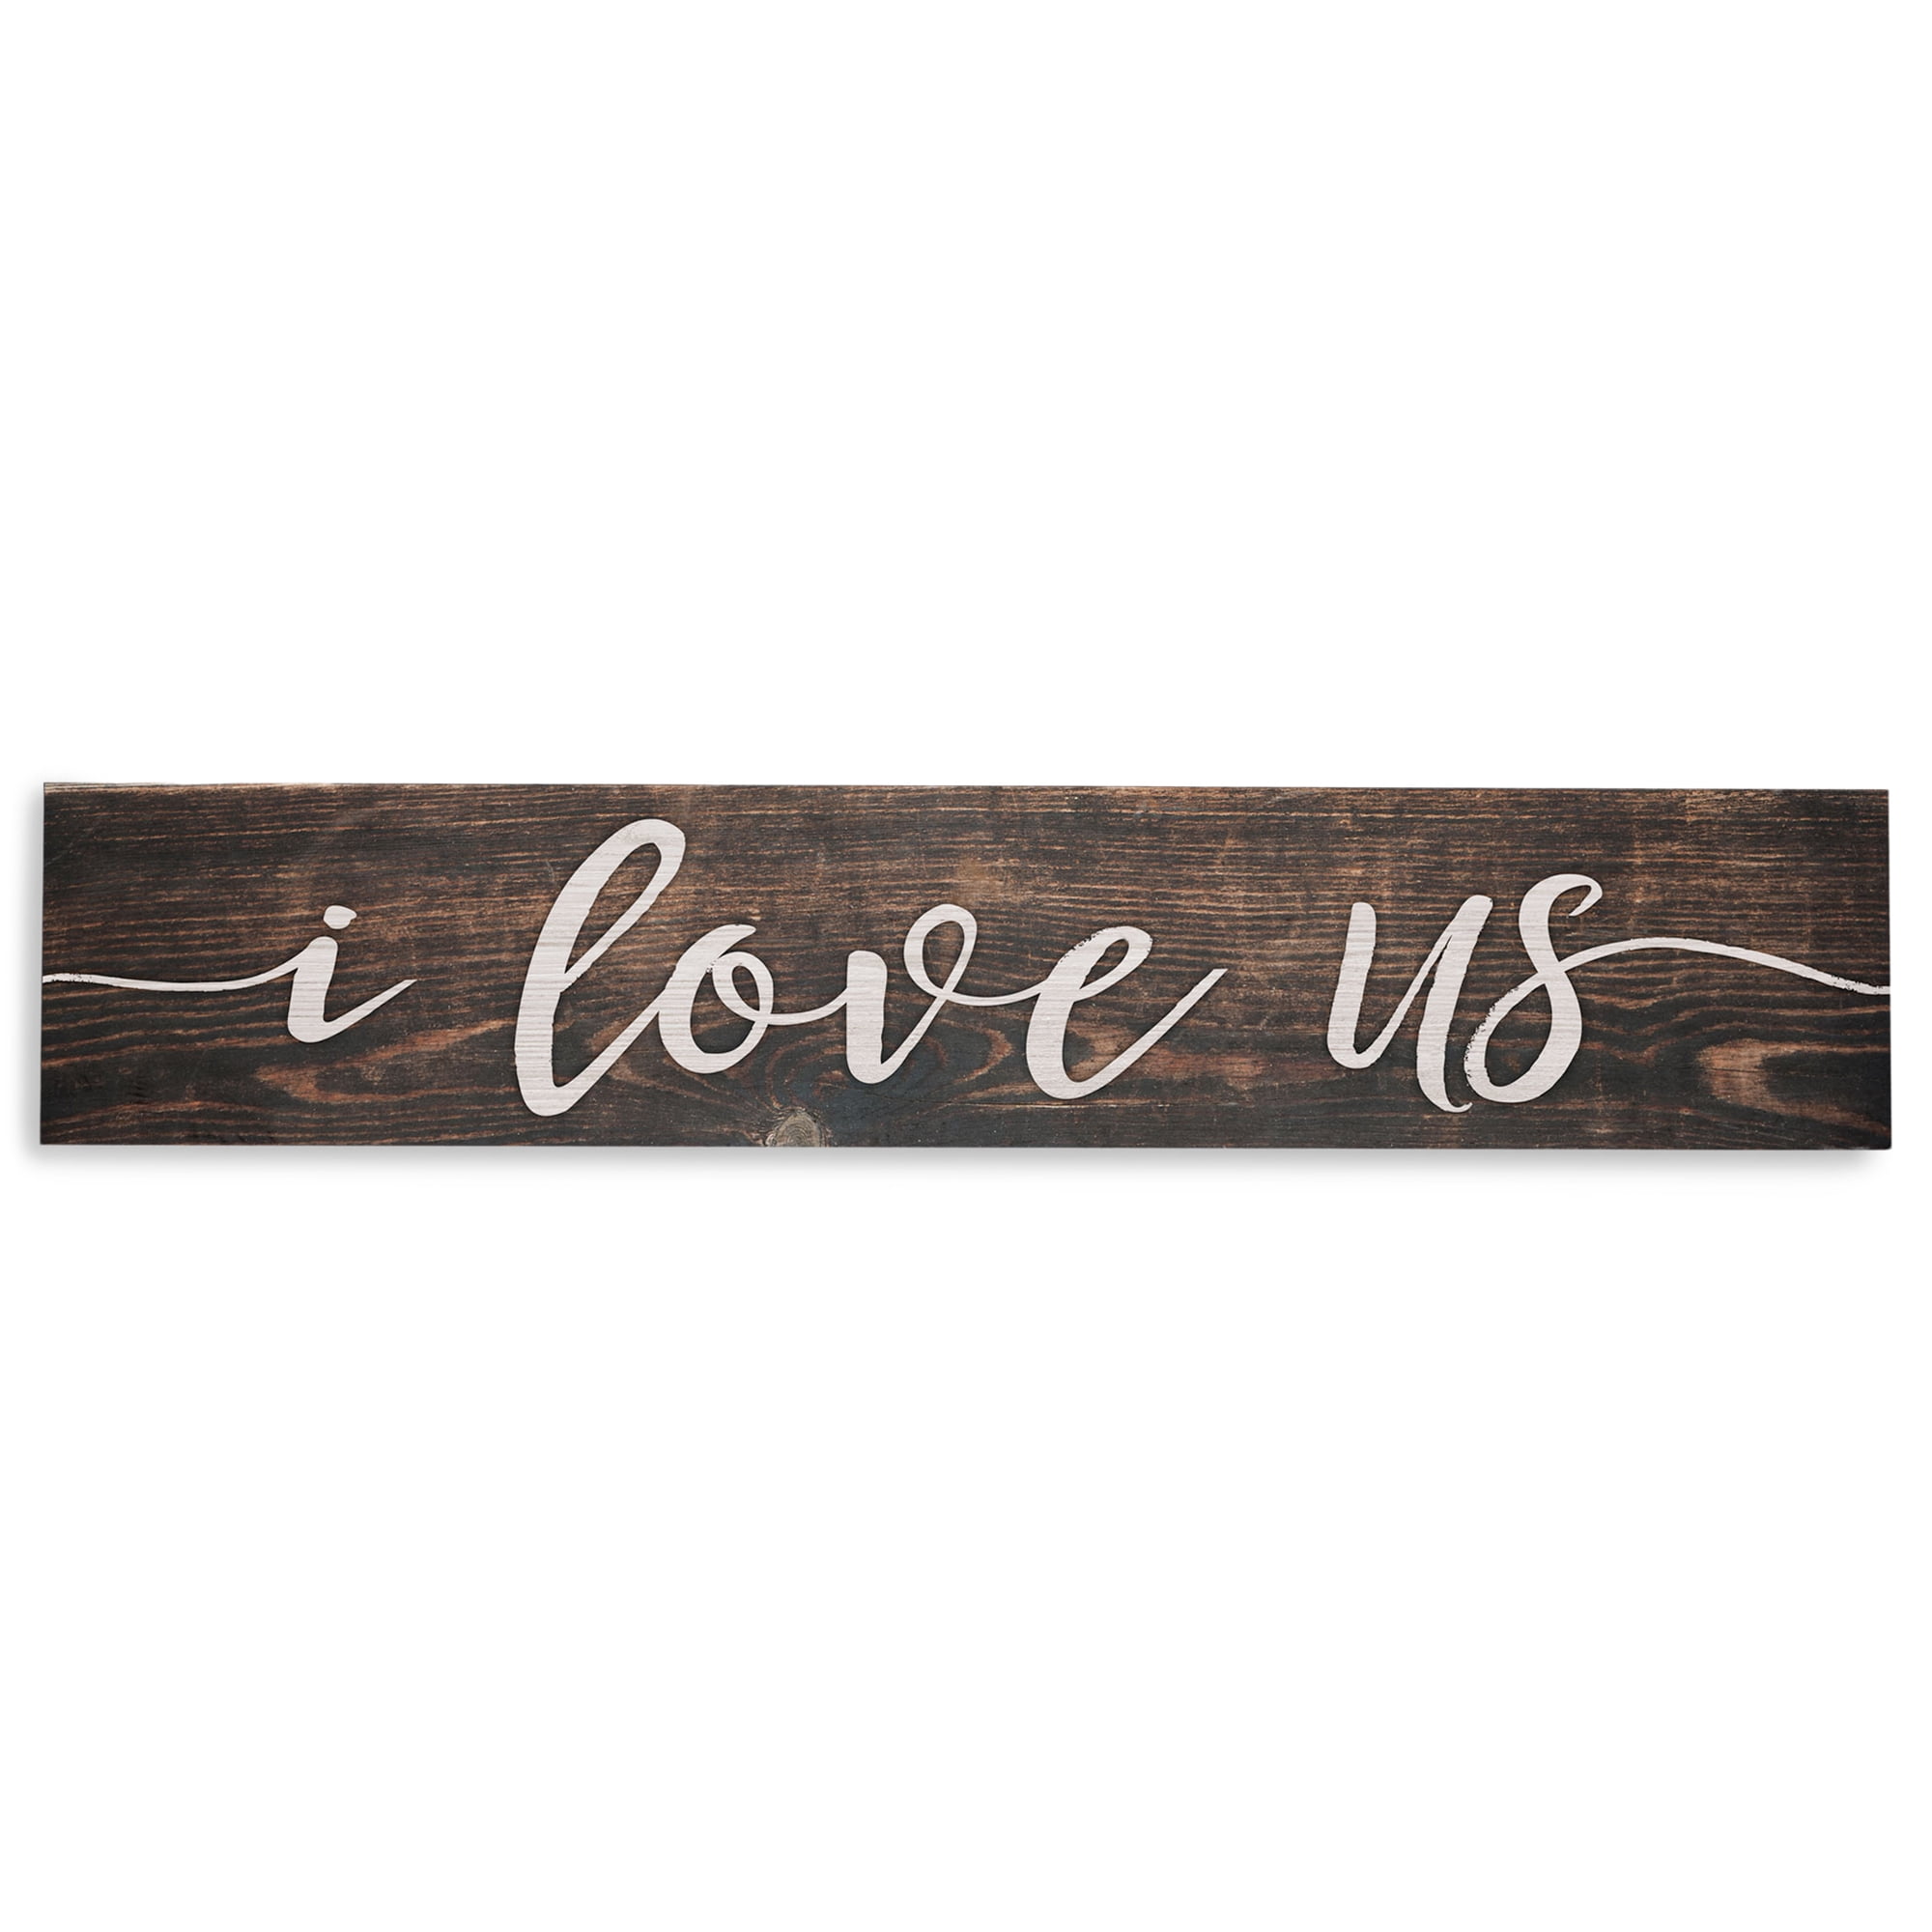 Graham Dunn This is Us Our Life Home Grey 13.5 x 1.5 Inch Pine Wood Skinny Block Tabletop Sign P